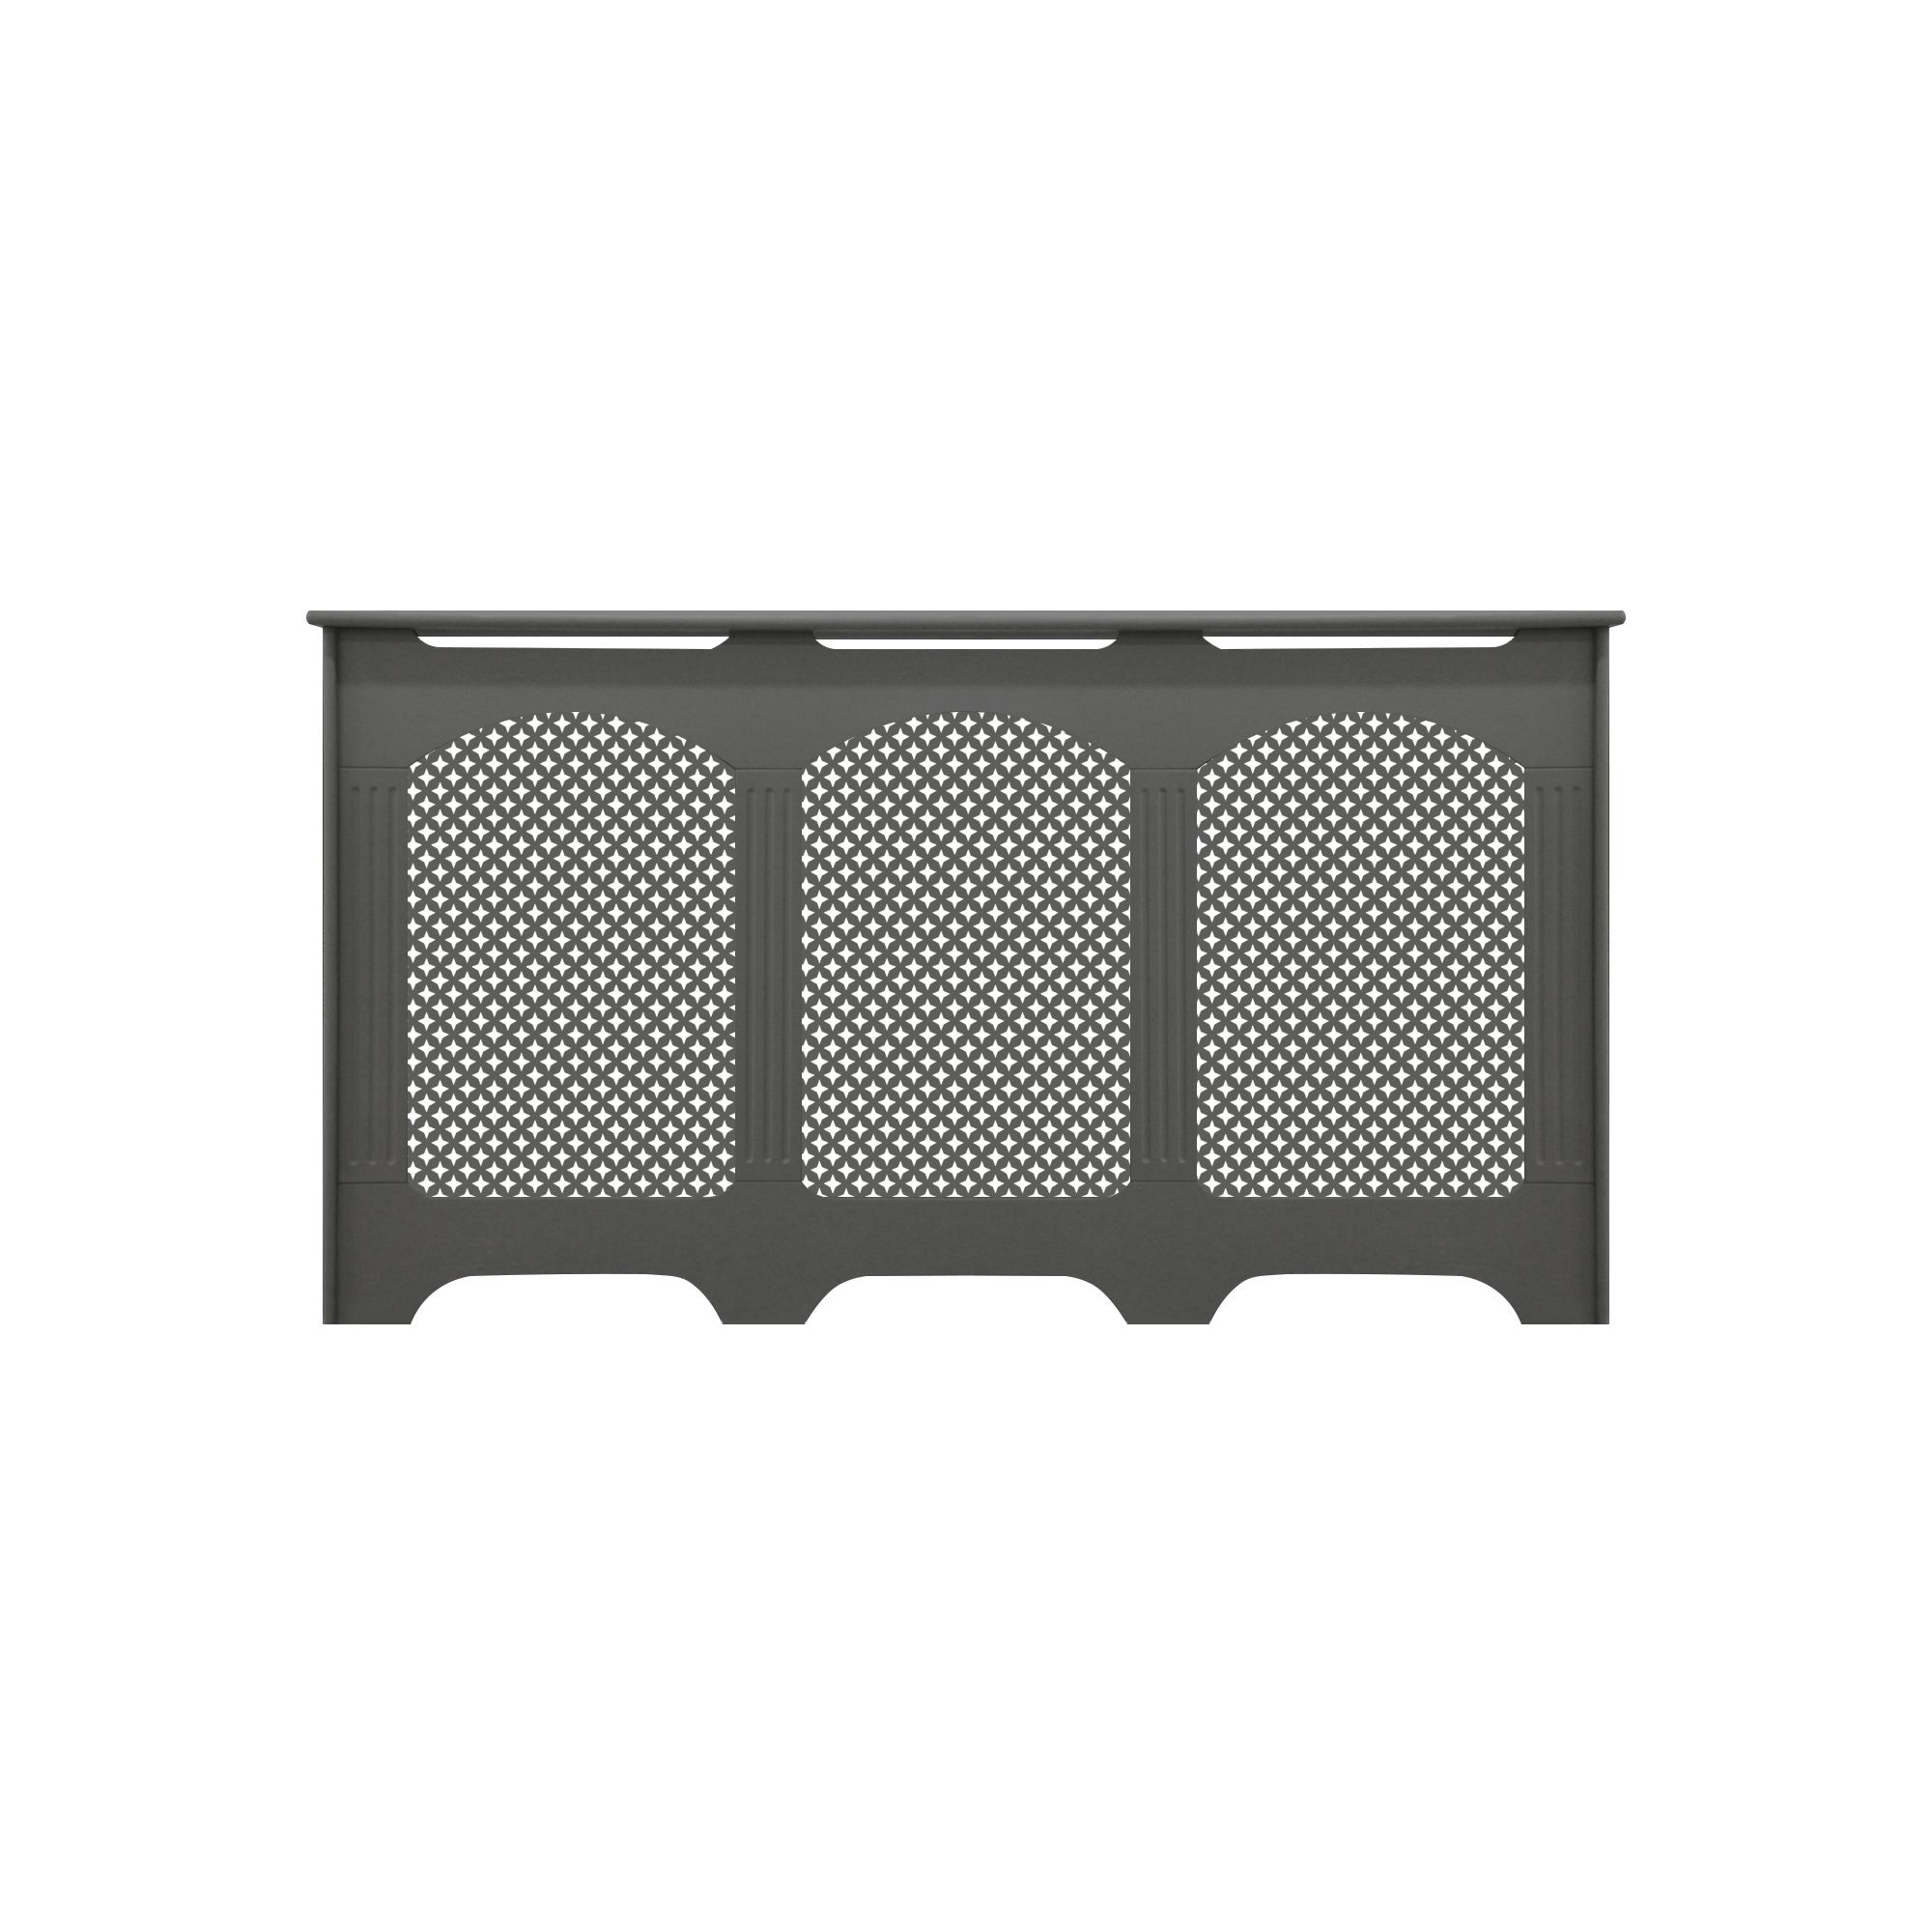 Cambridge Large Grey Radiator cover 900mm(H) 1710mm(W) 200mm(D)